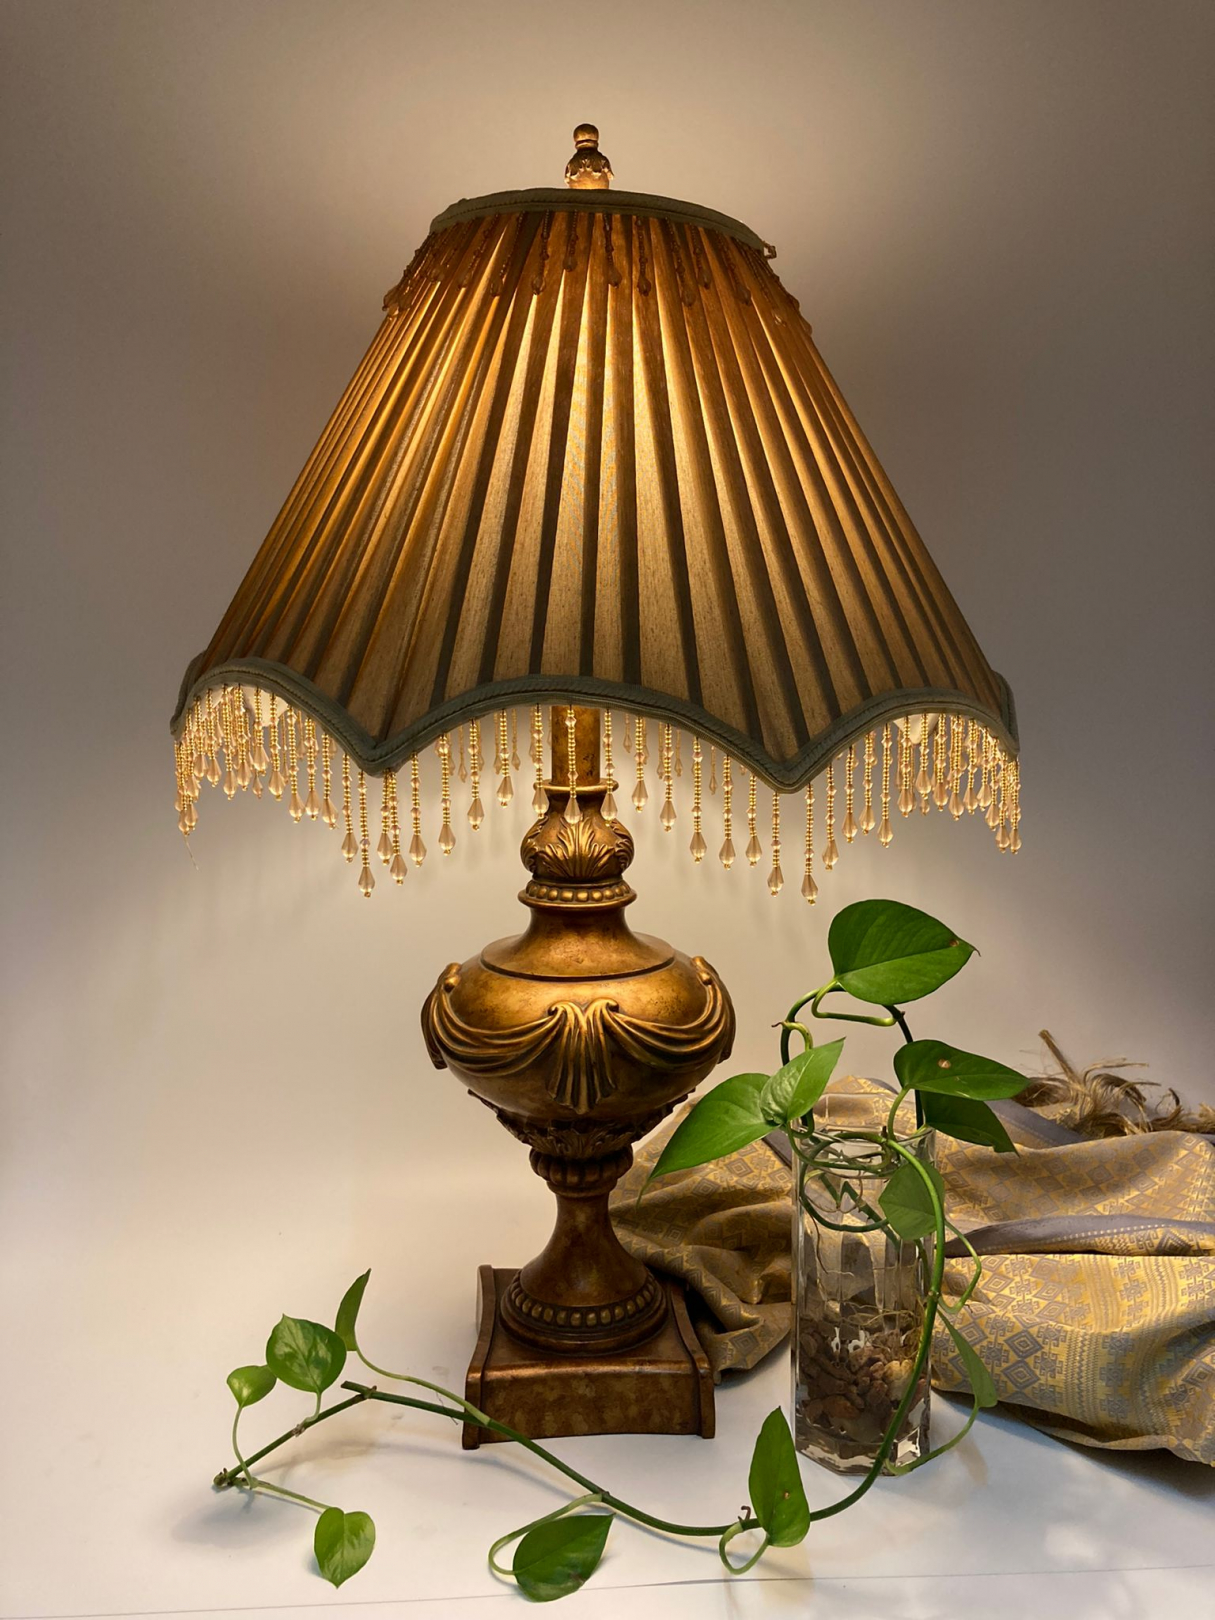 How to Upcycle a Lamp